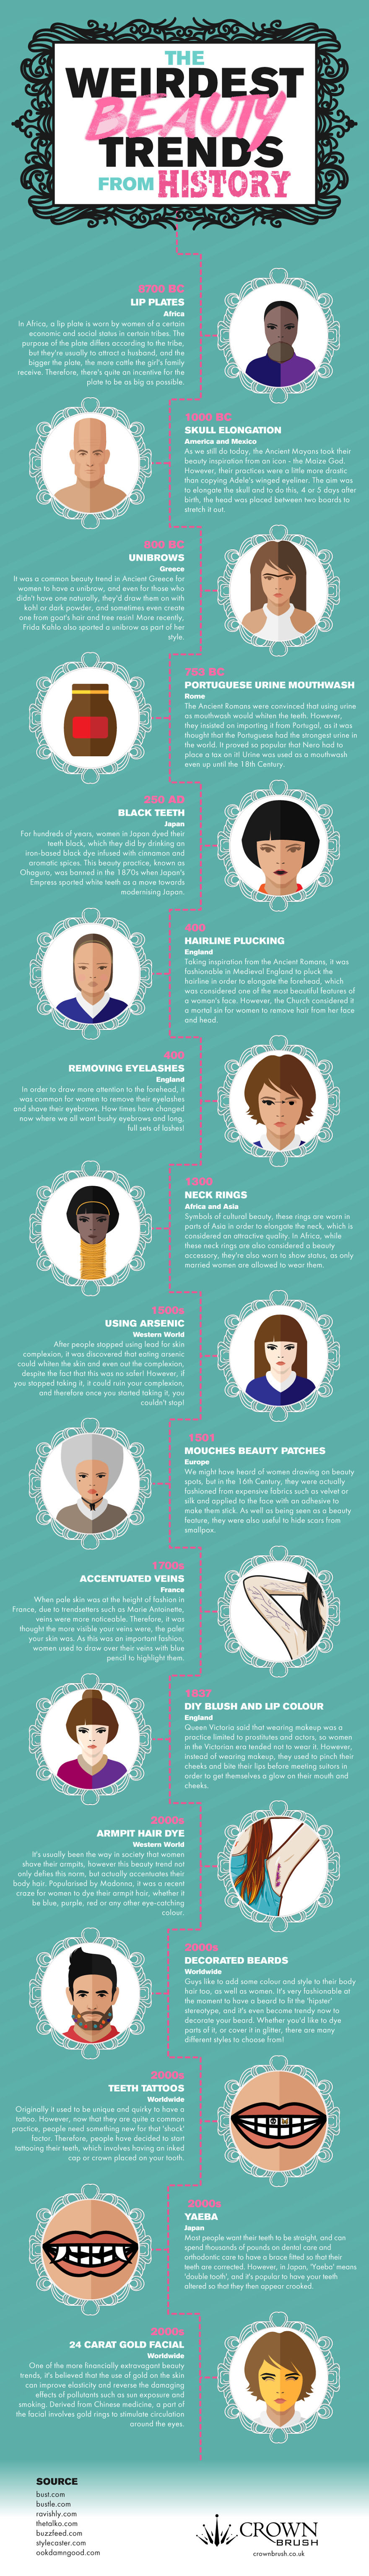 The Weirdest Beauty Trends From History